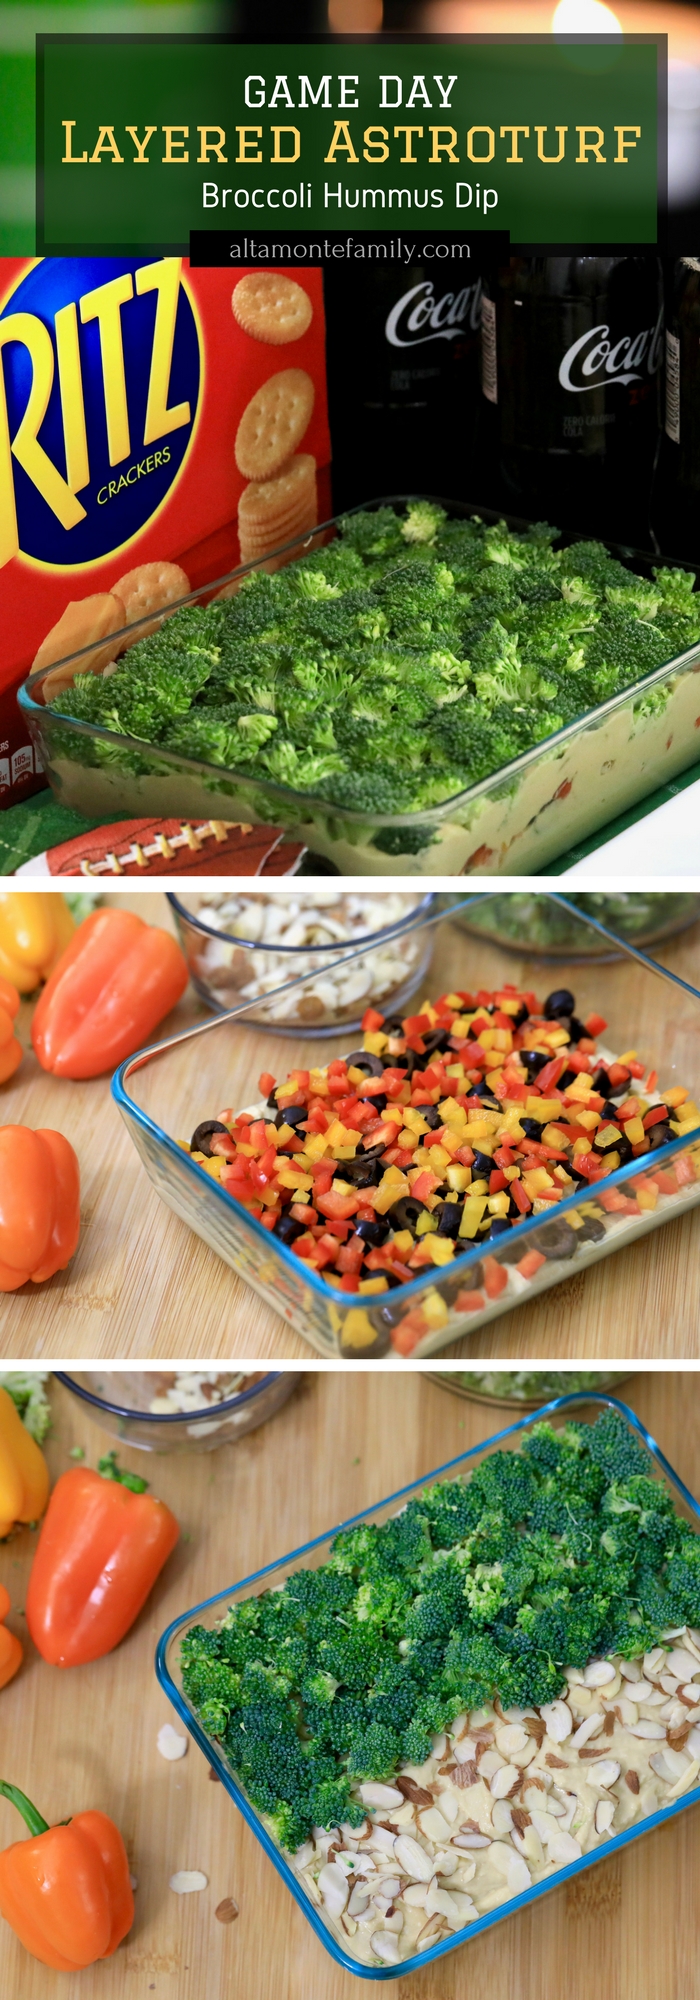 Game Day Appetizer - Layered Astroturf Broccoli Hummus Dip Recipe